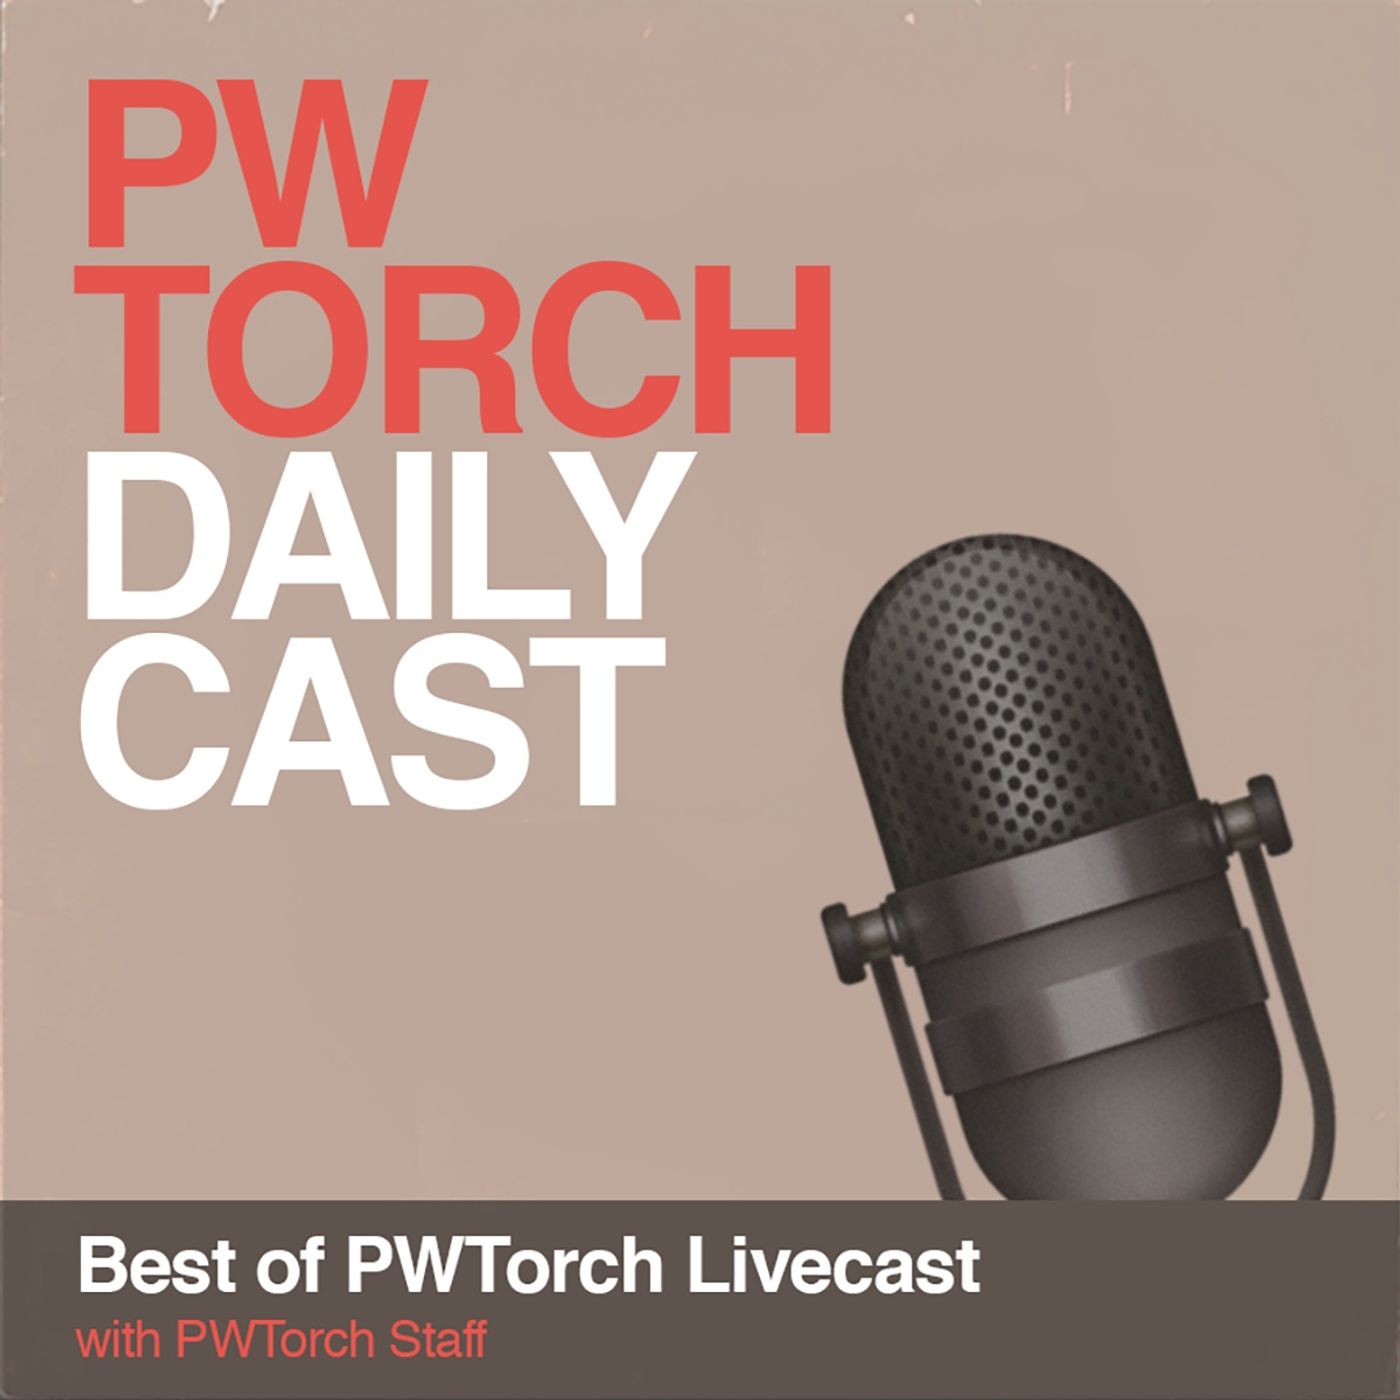 Best of PWTorch Livecast - (1-23-2014) Royal Rumble 2014 Predictions Show, Batista and Bryan favorites to win, Rumble impact on WrestleMania